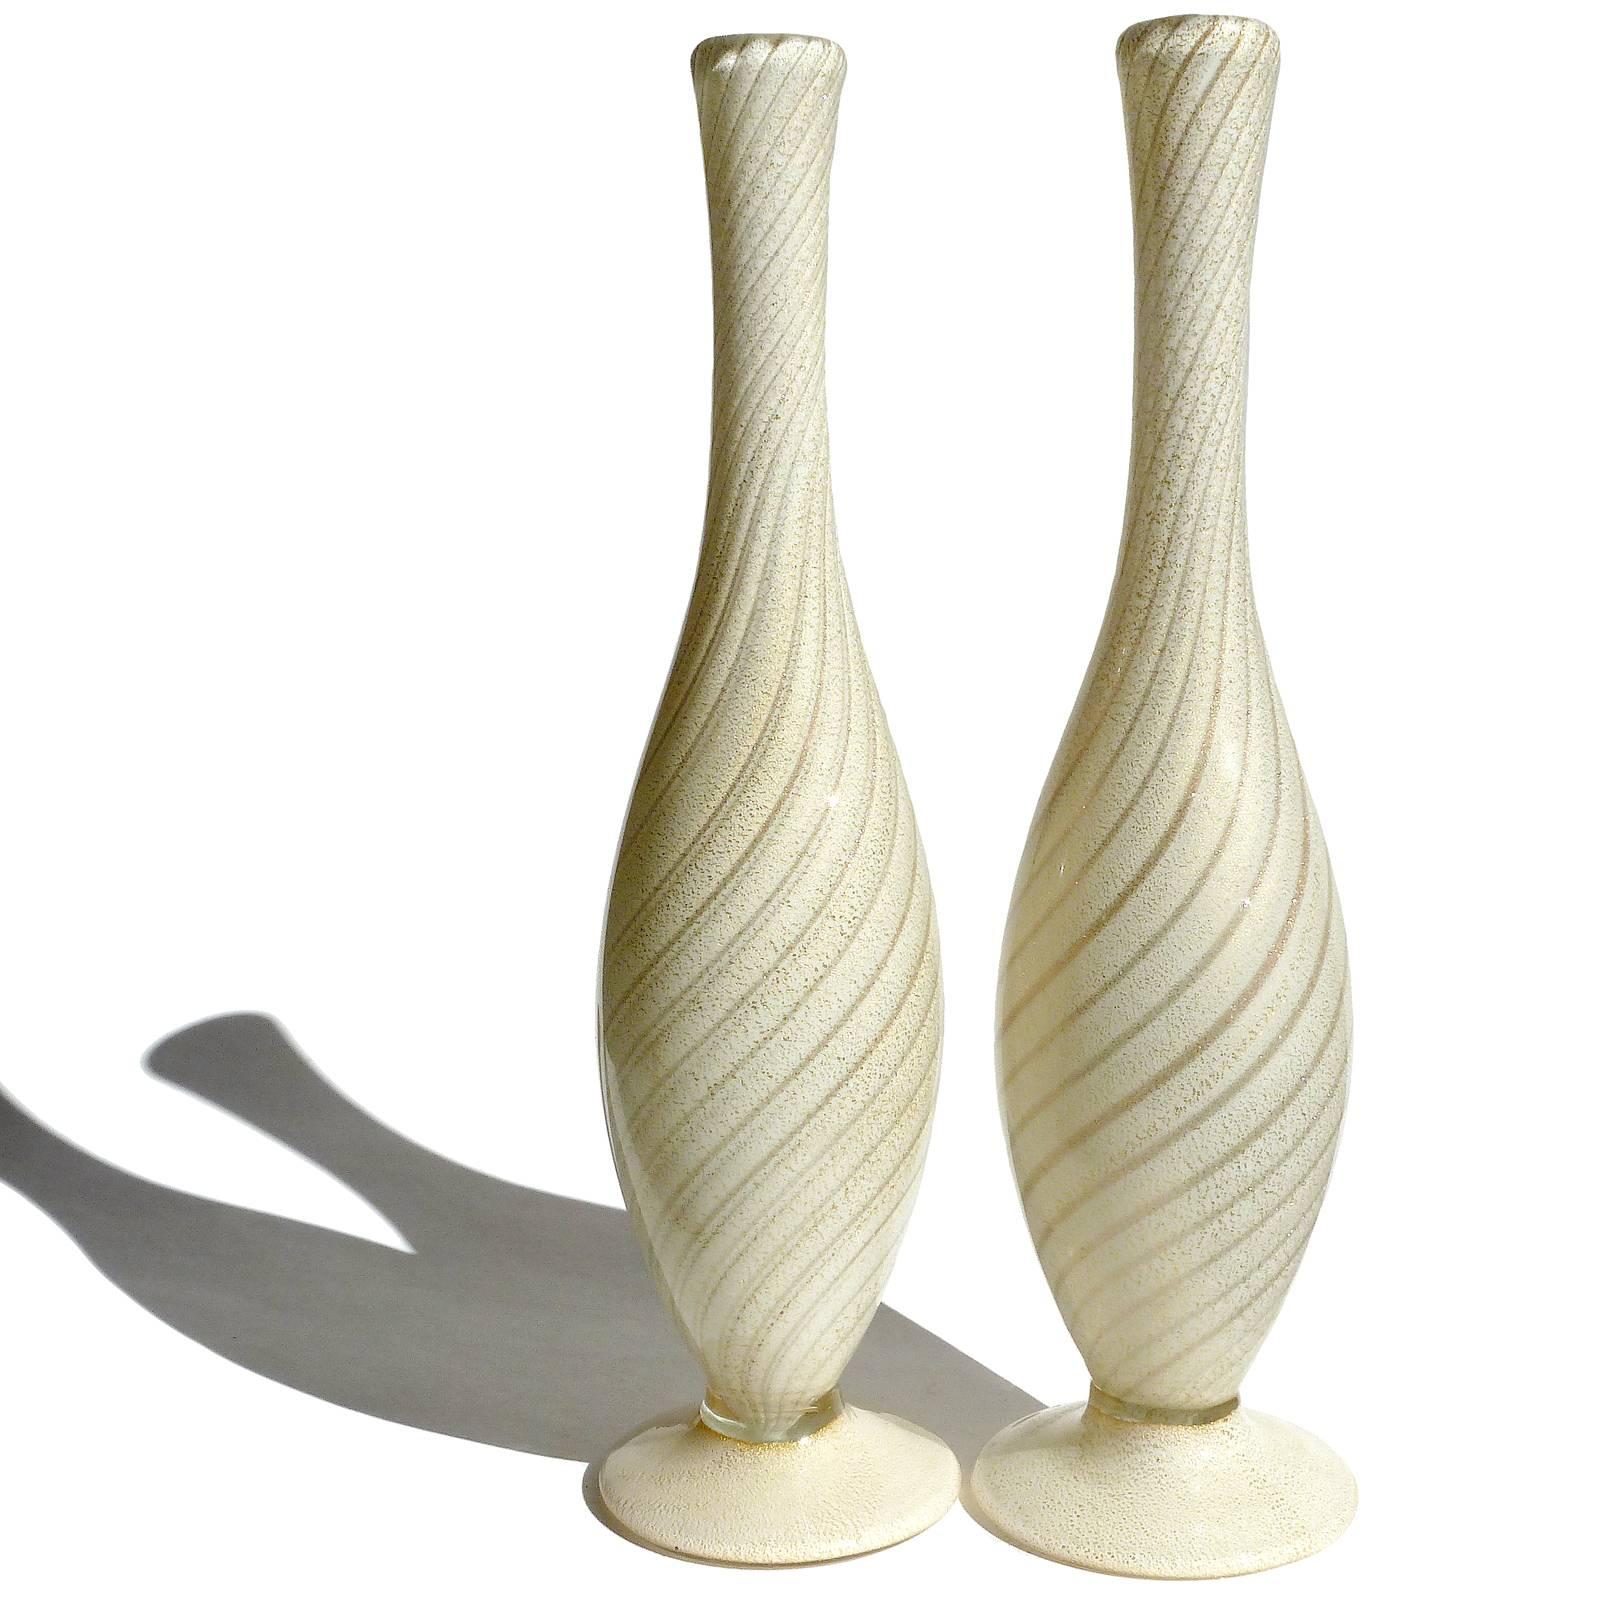 Beautiful pair of Murano hand blown white, gold and swirling aventurine fleck stripes Italian art glass flower vases. Documented to designer Alfredo Barbini, circa 1950s. Very elegant shape, each with applied foot, and profusely covered in gold